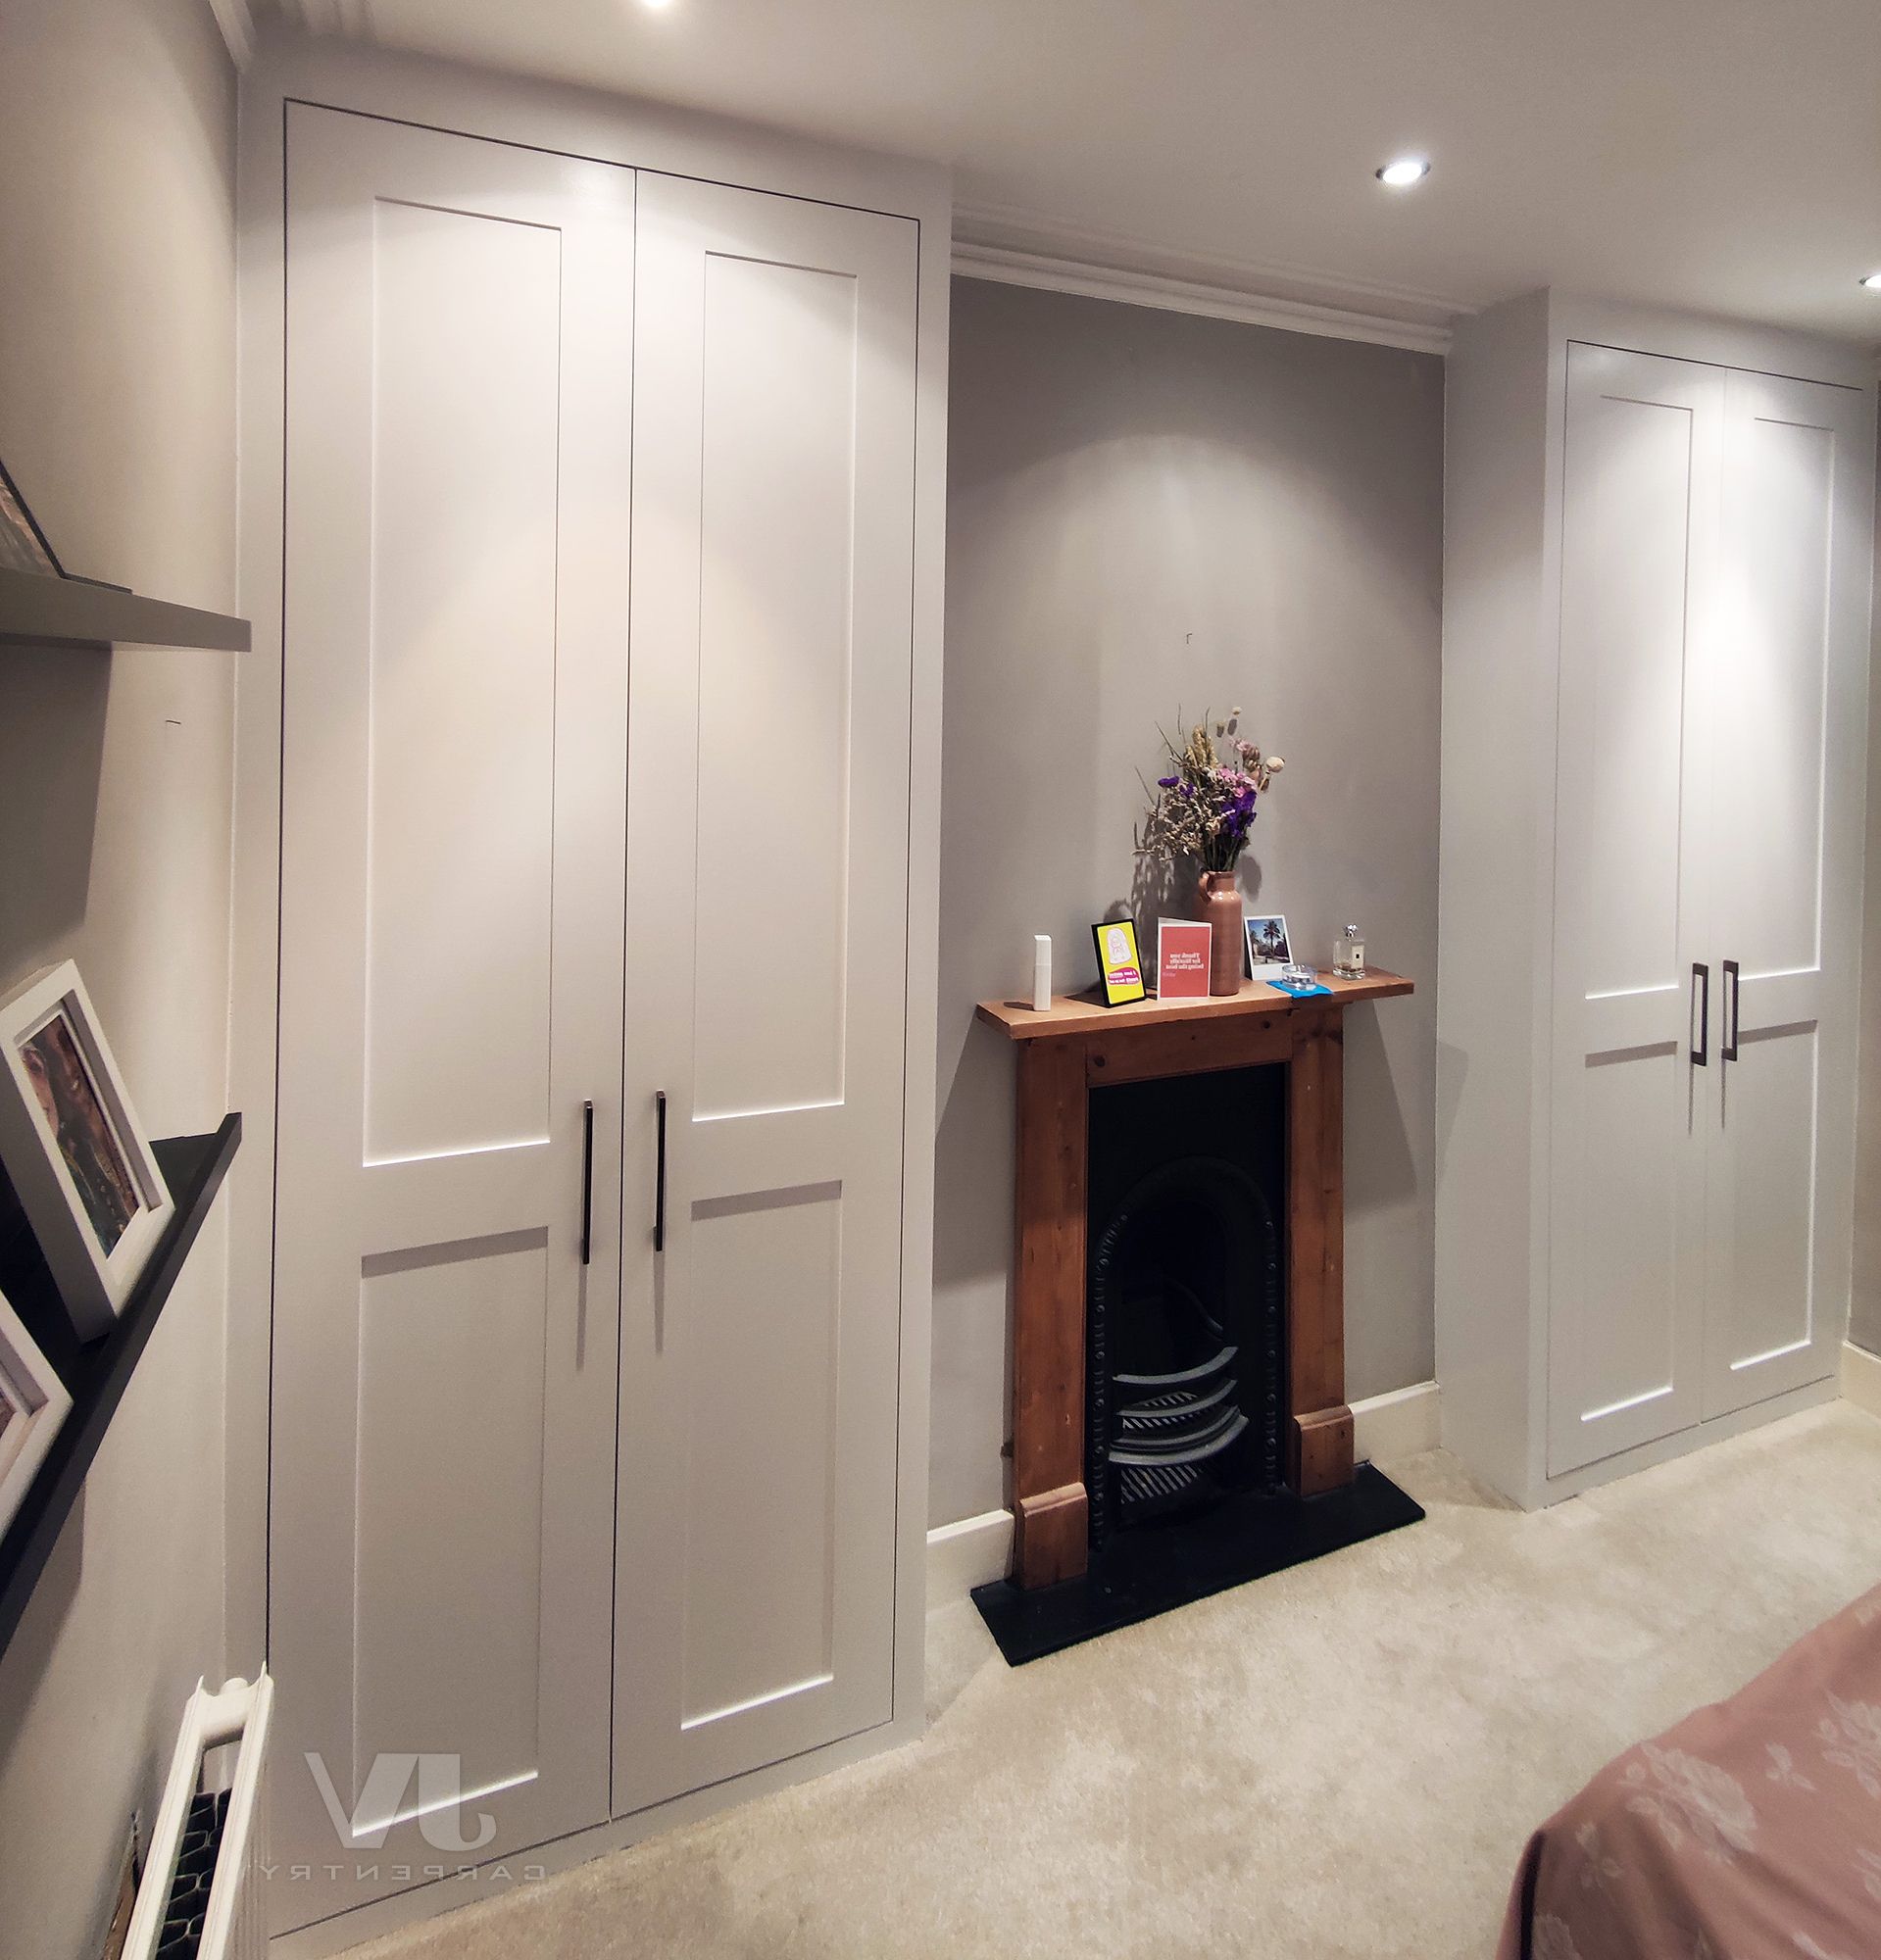 Alcove Wardrobes On Either Side Of The Chimney | London | Jv Carpentry Throughout Alcove Wardrobes (View 7 of 20)